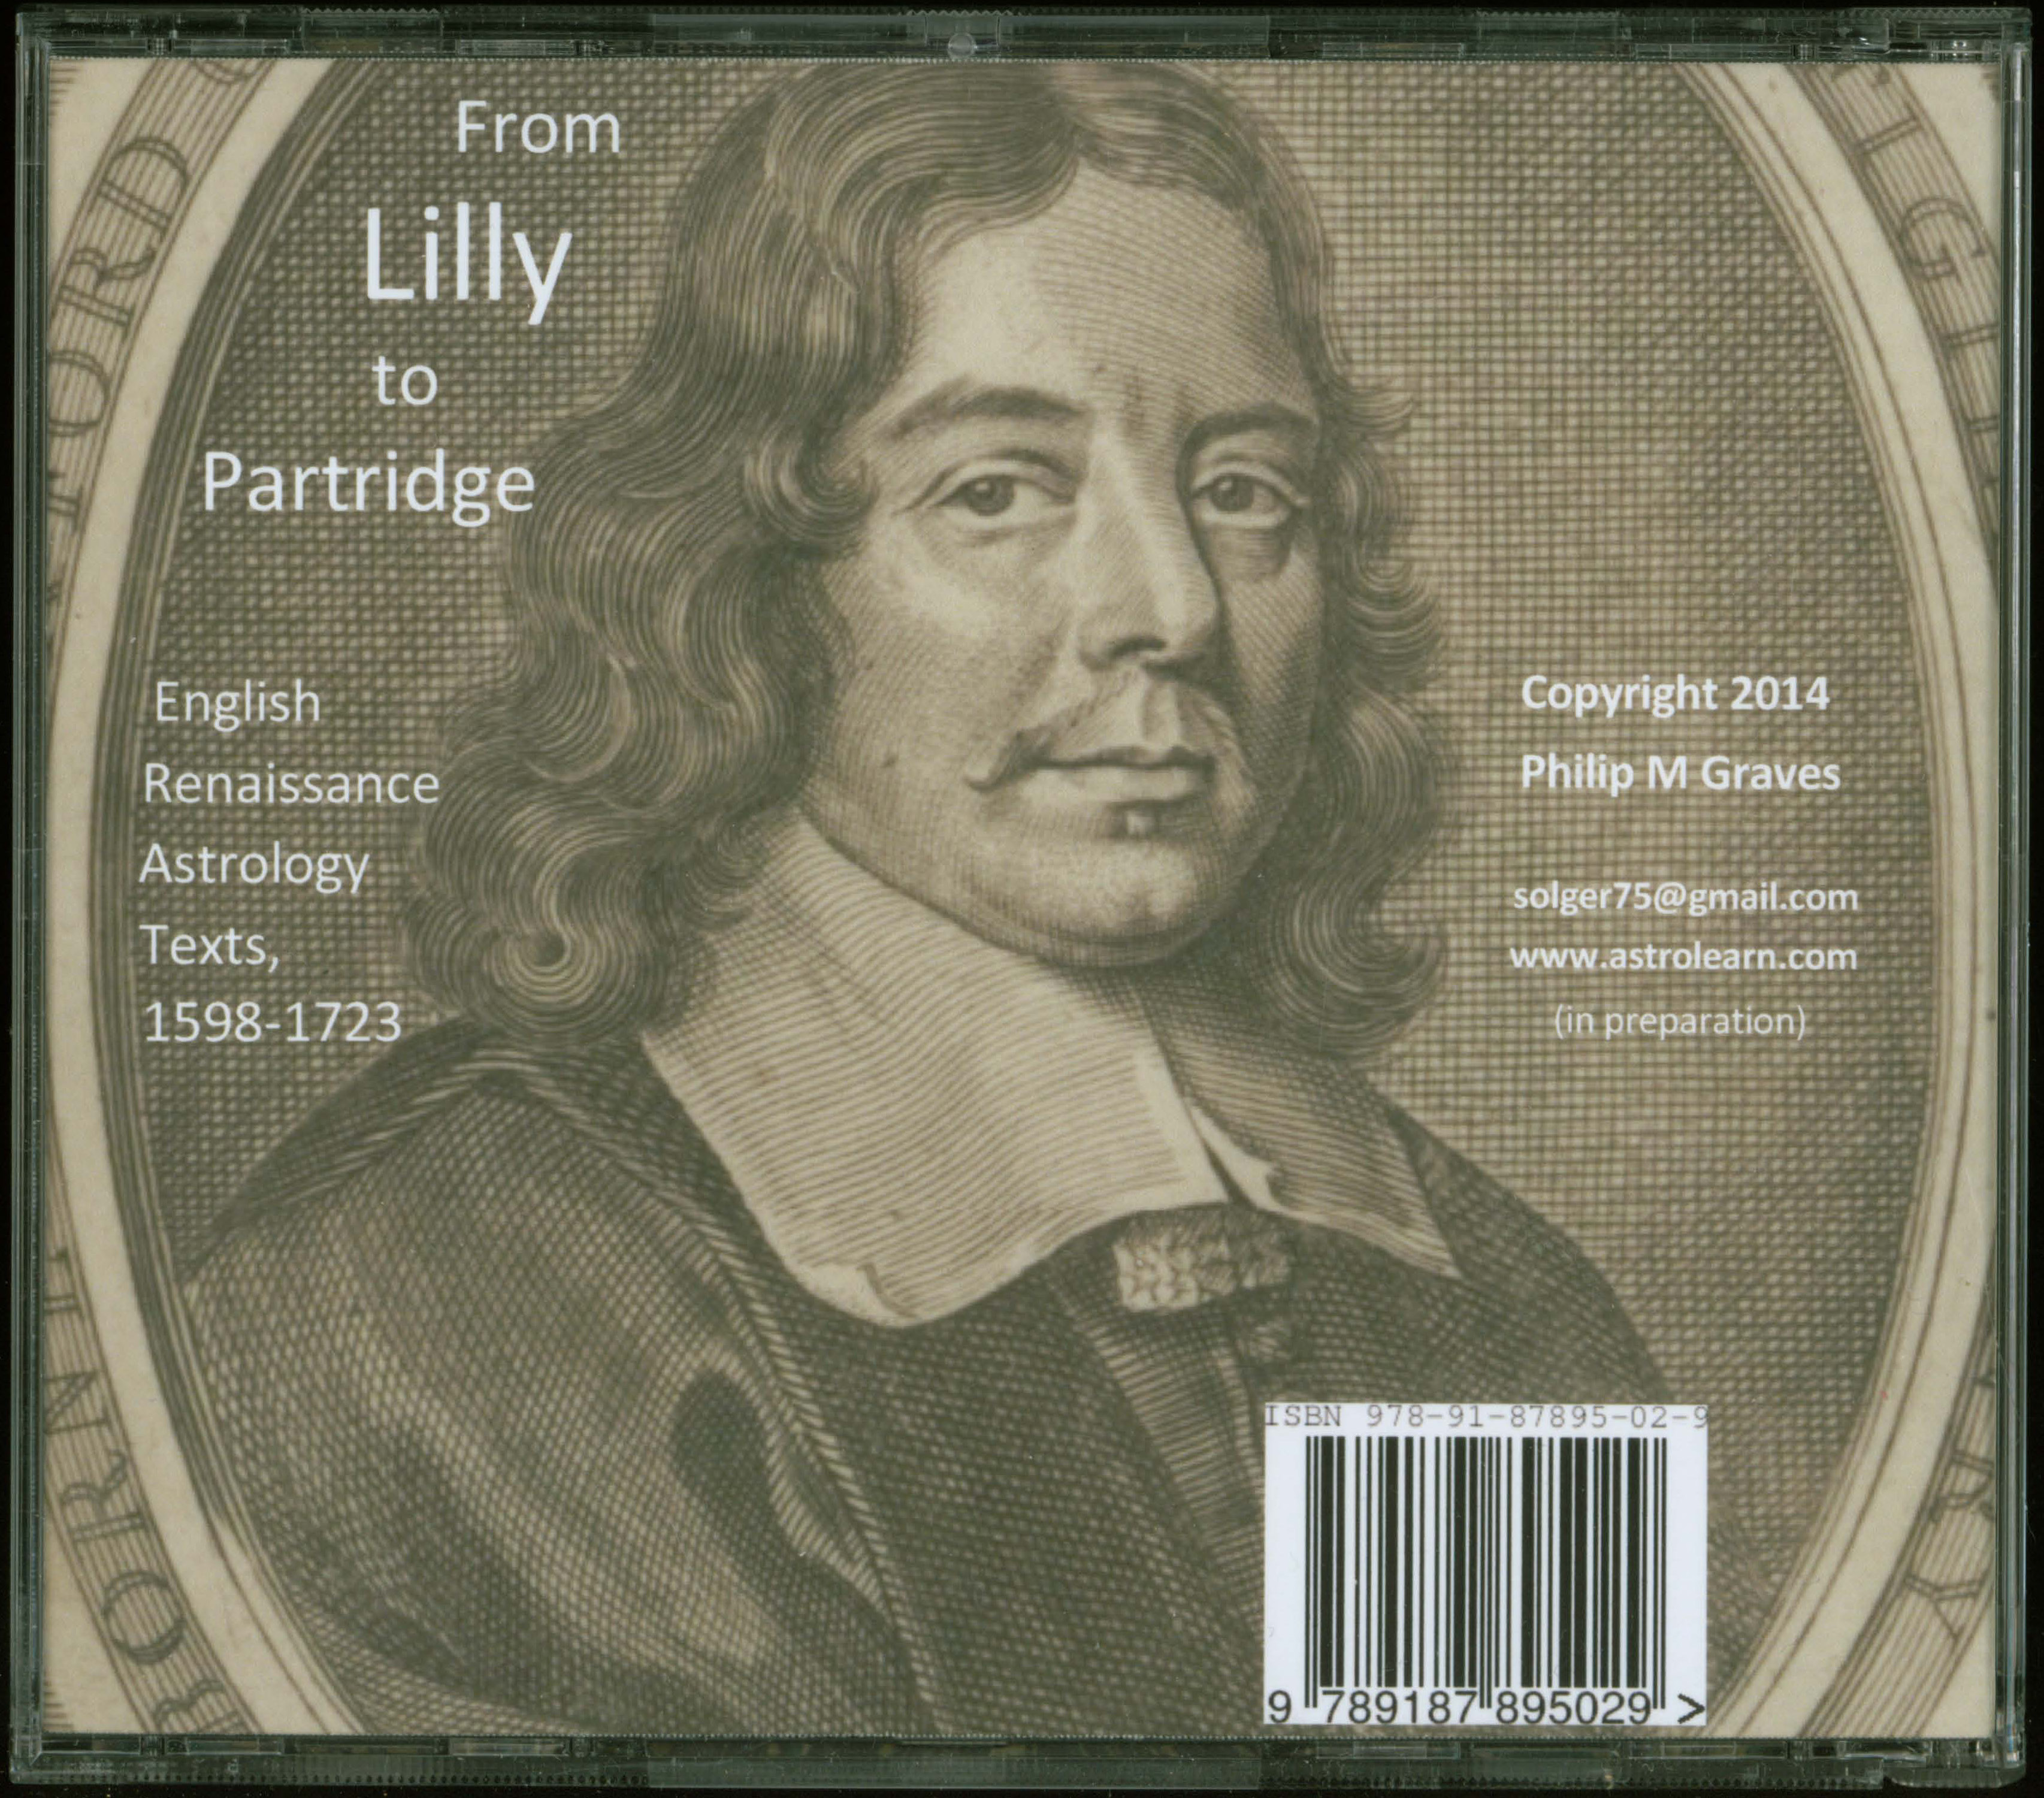 From Lilly to Partridge: English Renaissance Astrology Texts DVD, Rear Cover